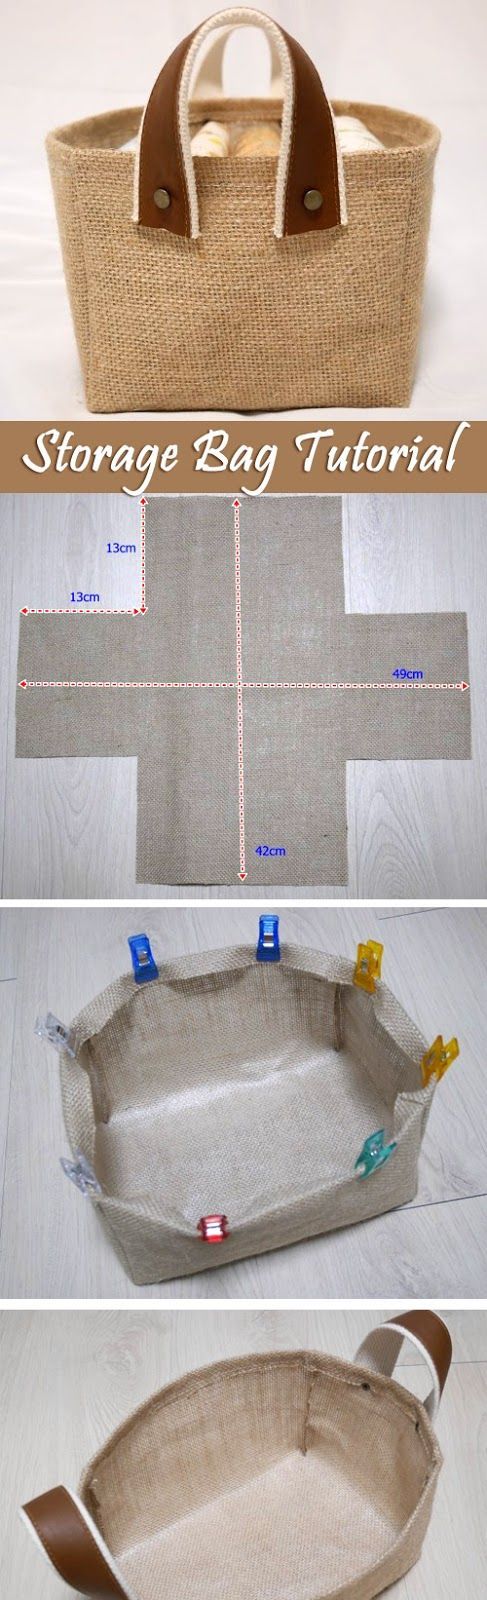 Storage Fabric Burlap Box Pattern and Tutorial. Bag Step by step photo tutorial…